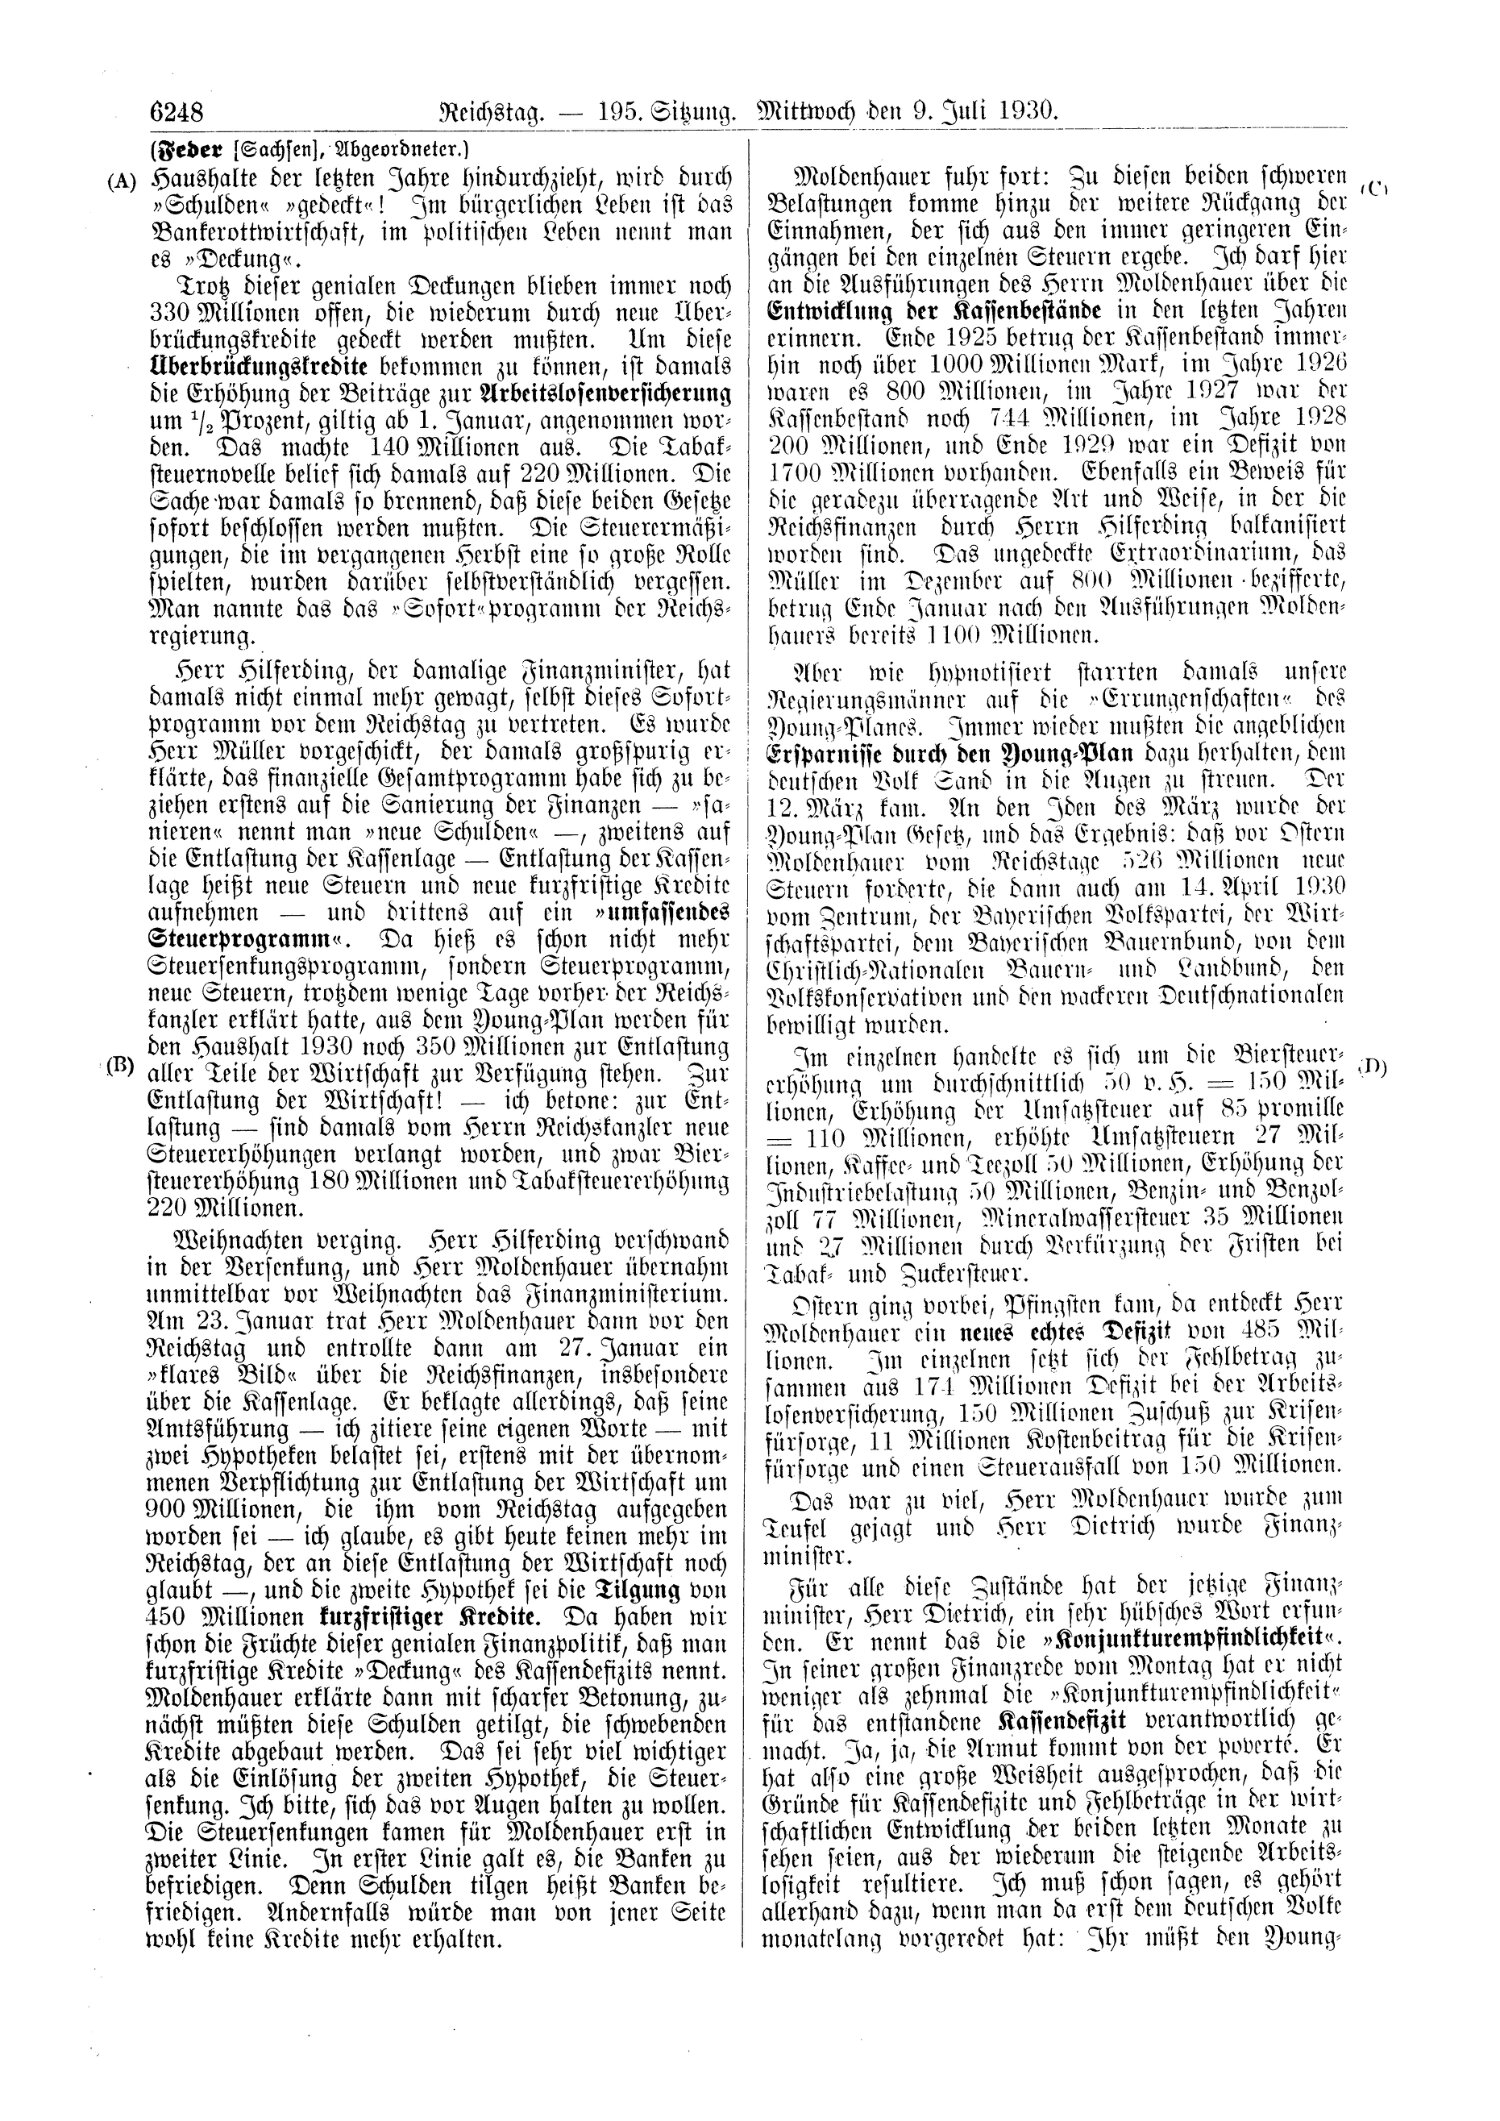 Scan of page 6248